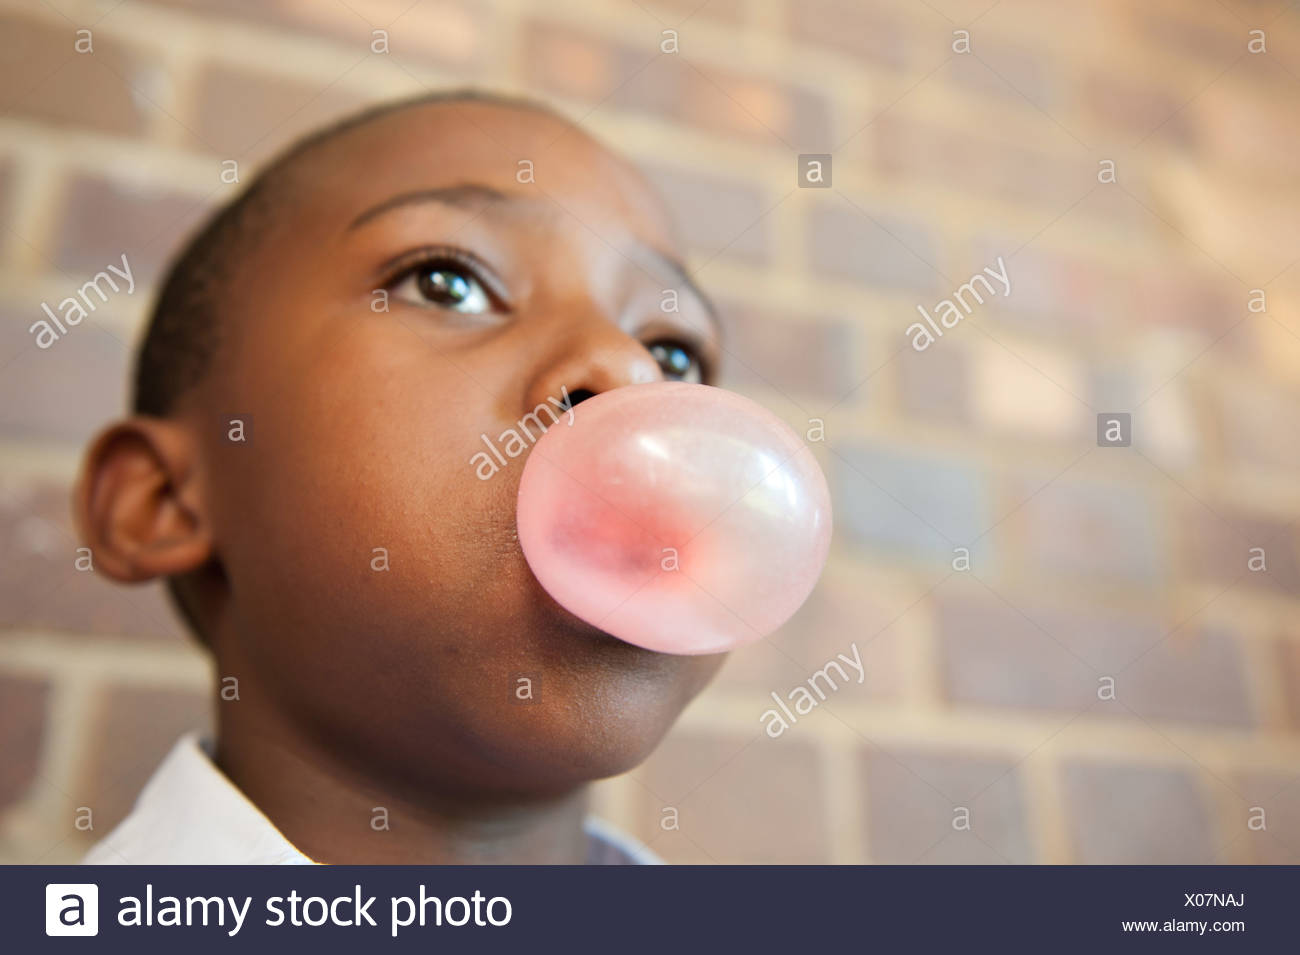 Boy Blowing Bubble Gum High Resolution Stock Photography and Images - Alamy